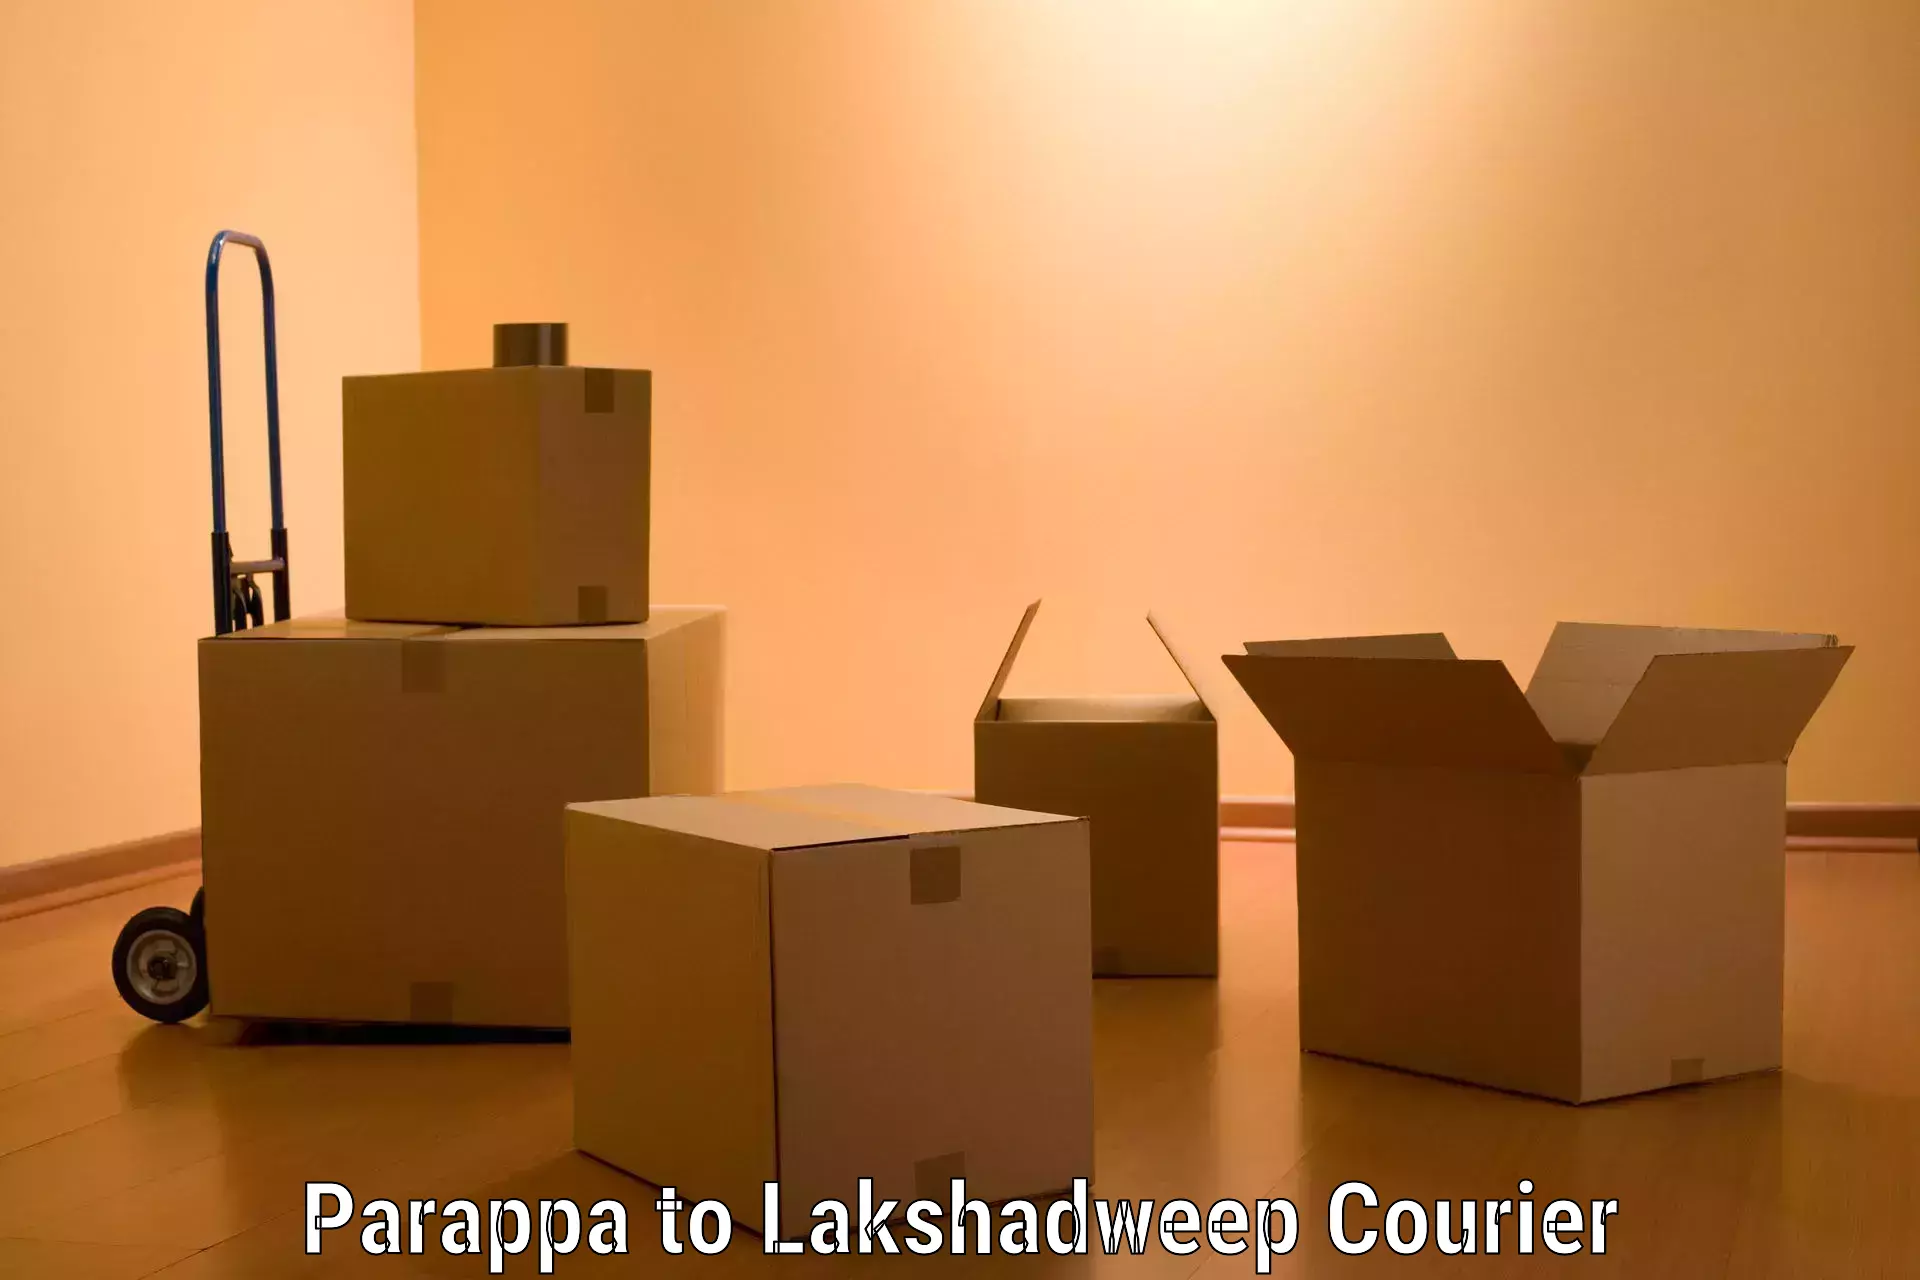 Home relocation experts Parappa to Lakshadweep